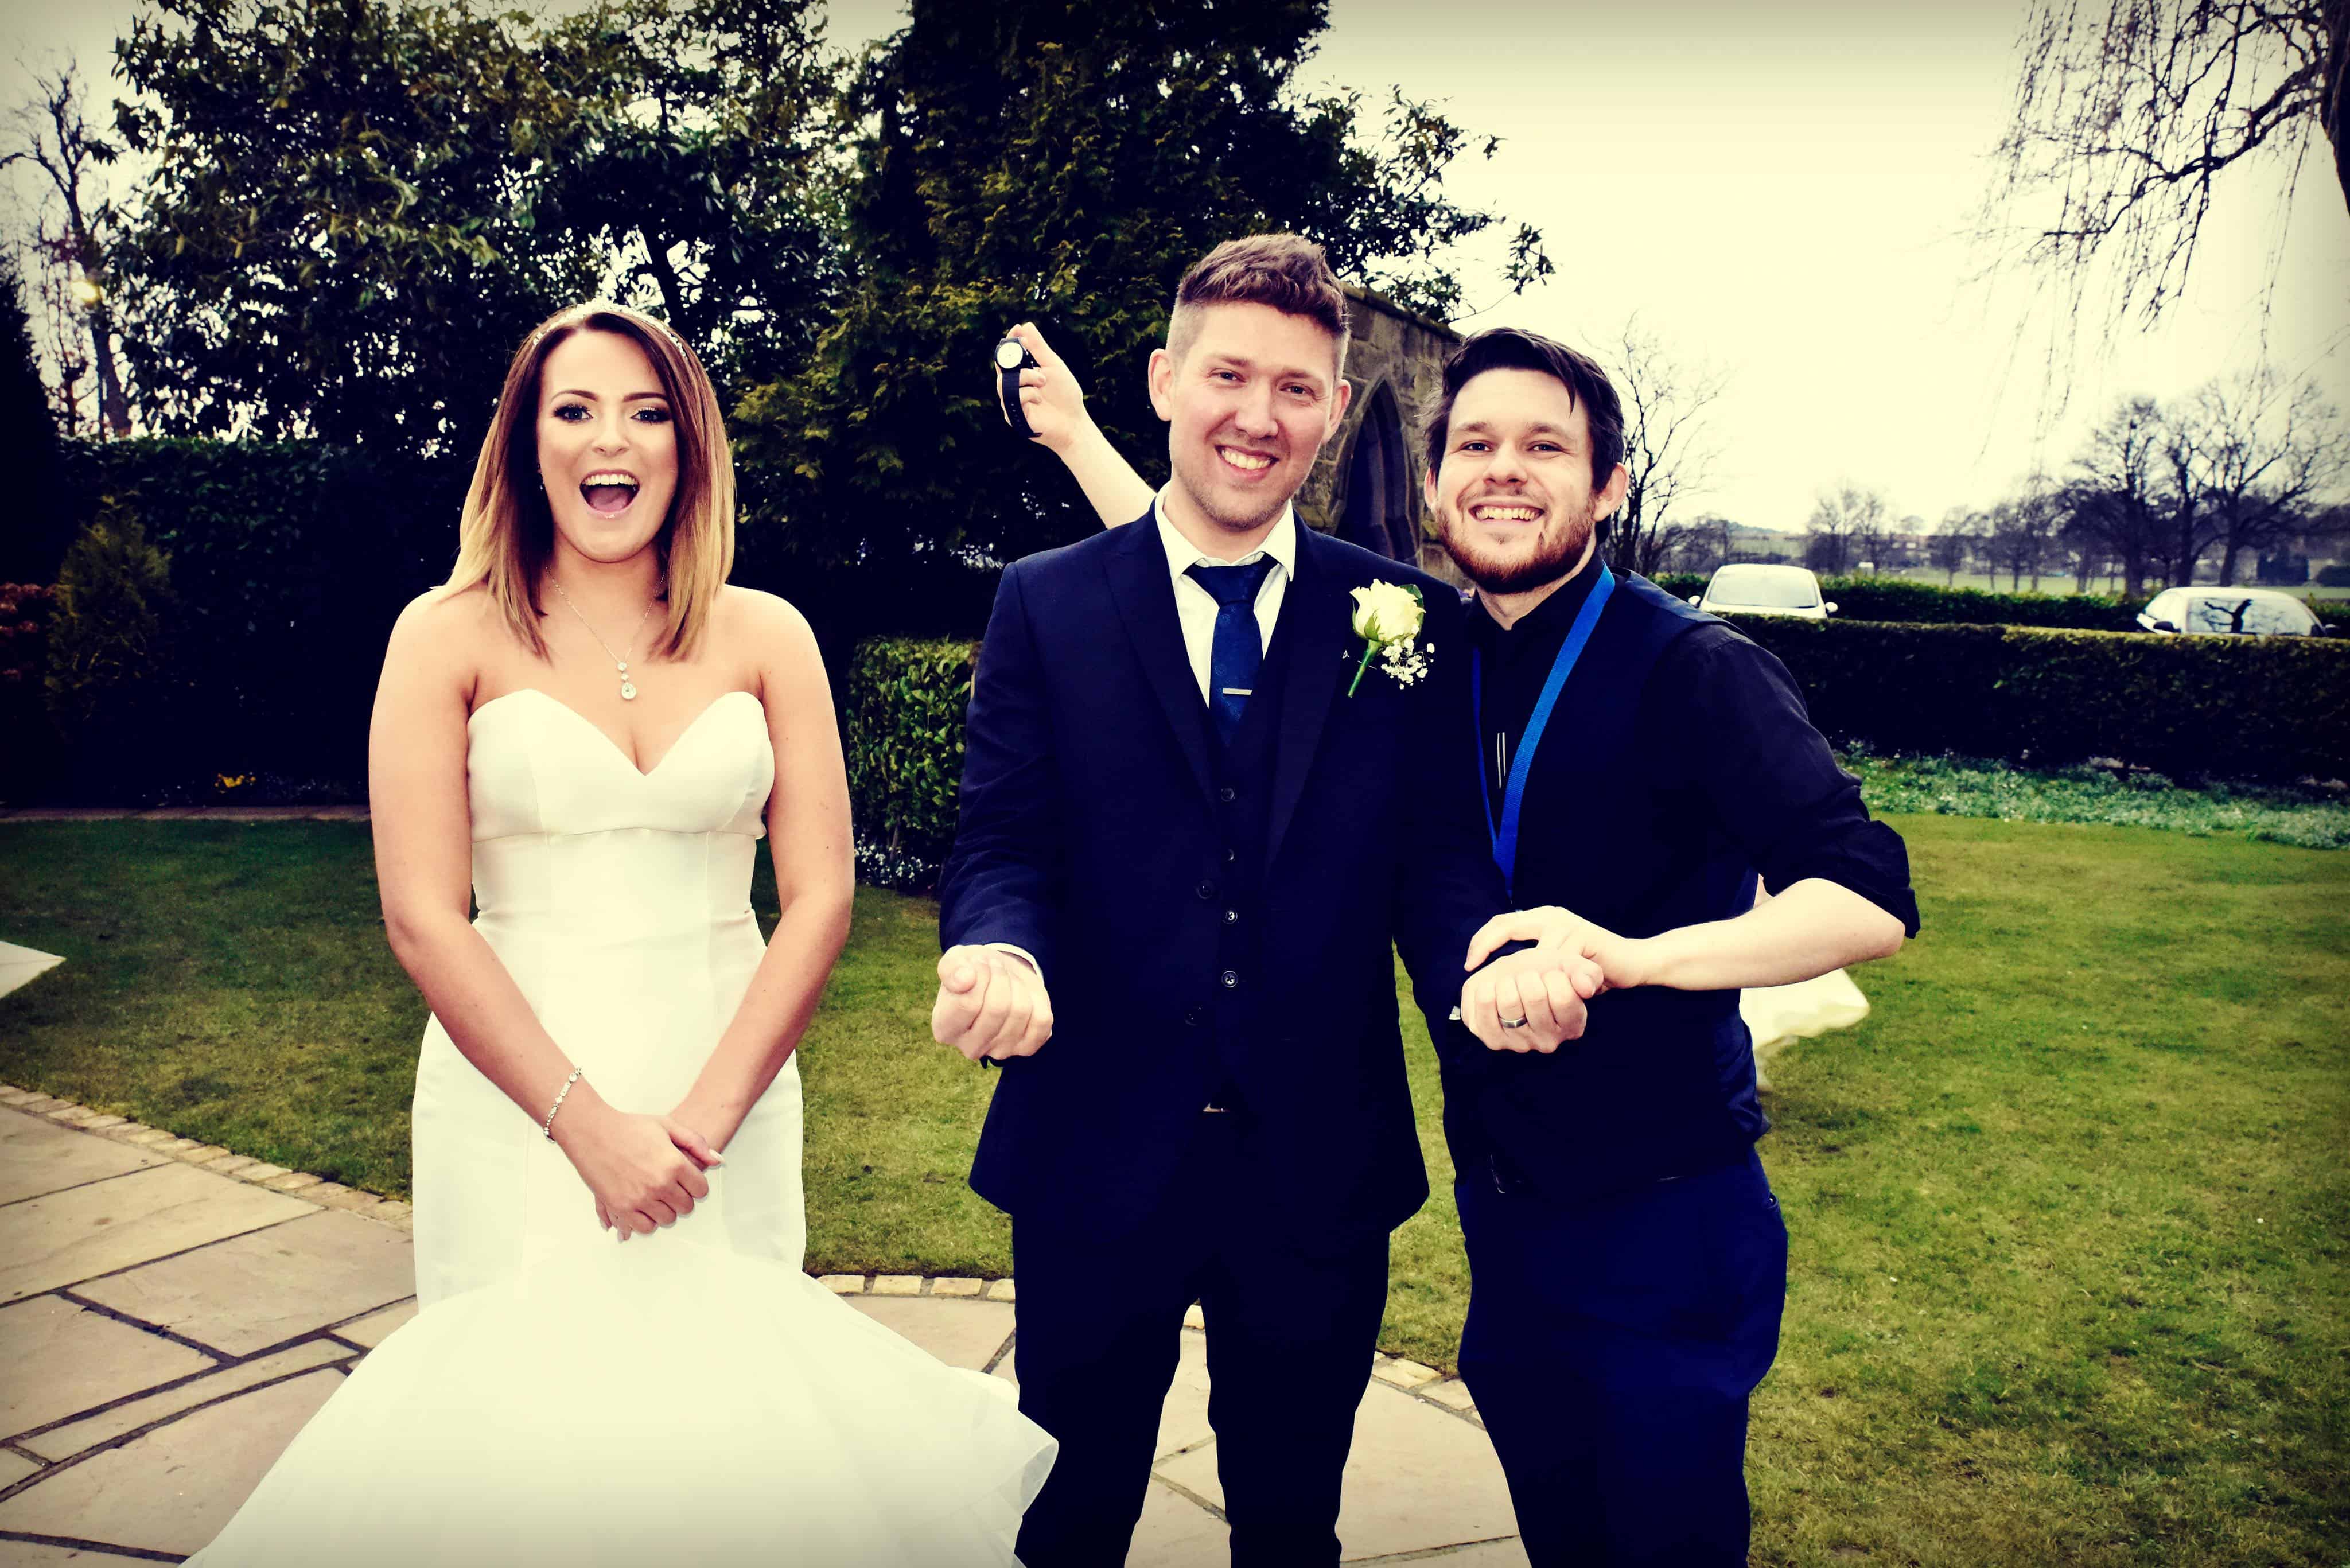 Professional Magician Greg Holroyd performing a small stand-up show for the Bride and Groom on their wedding day